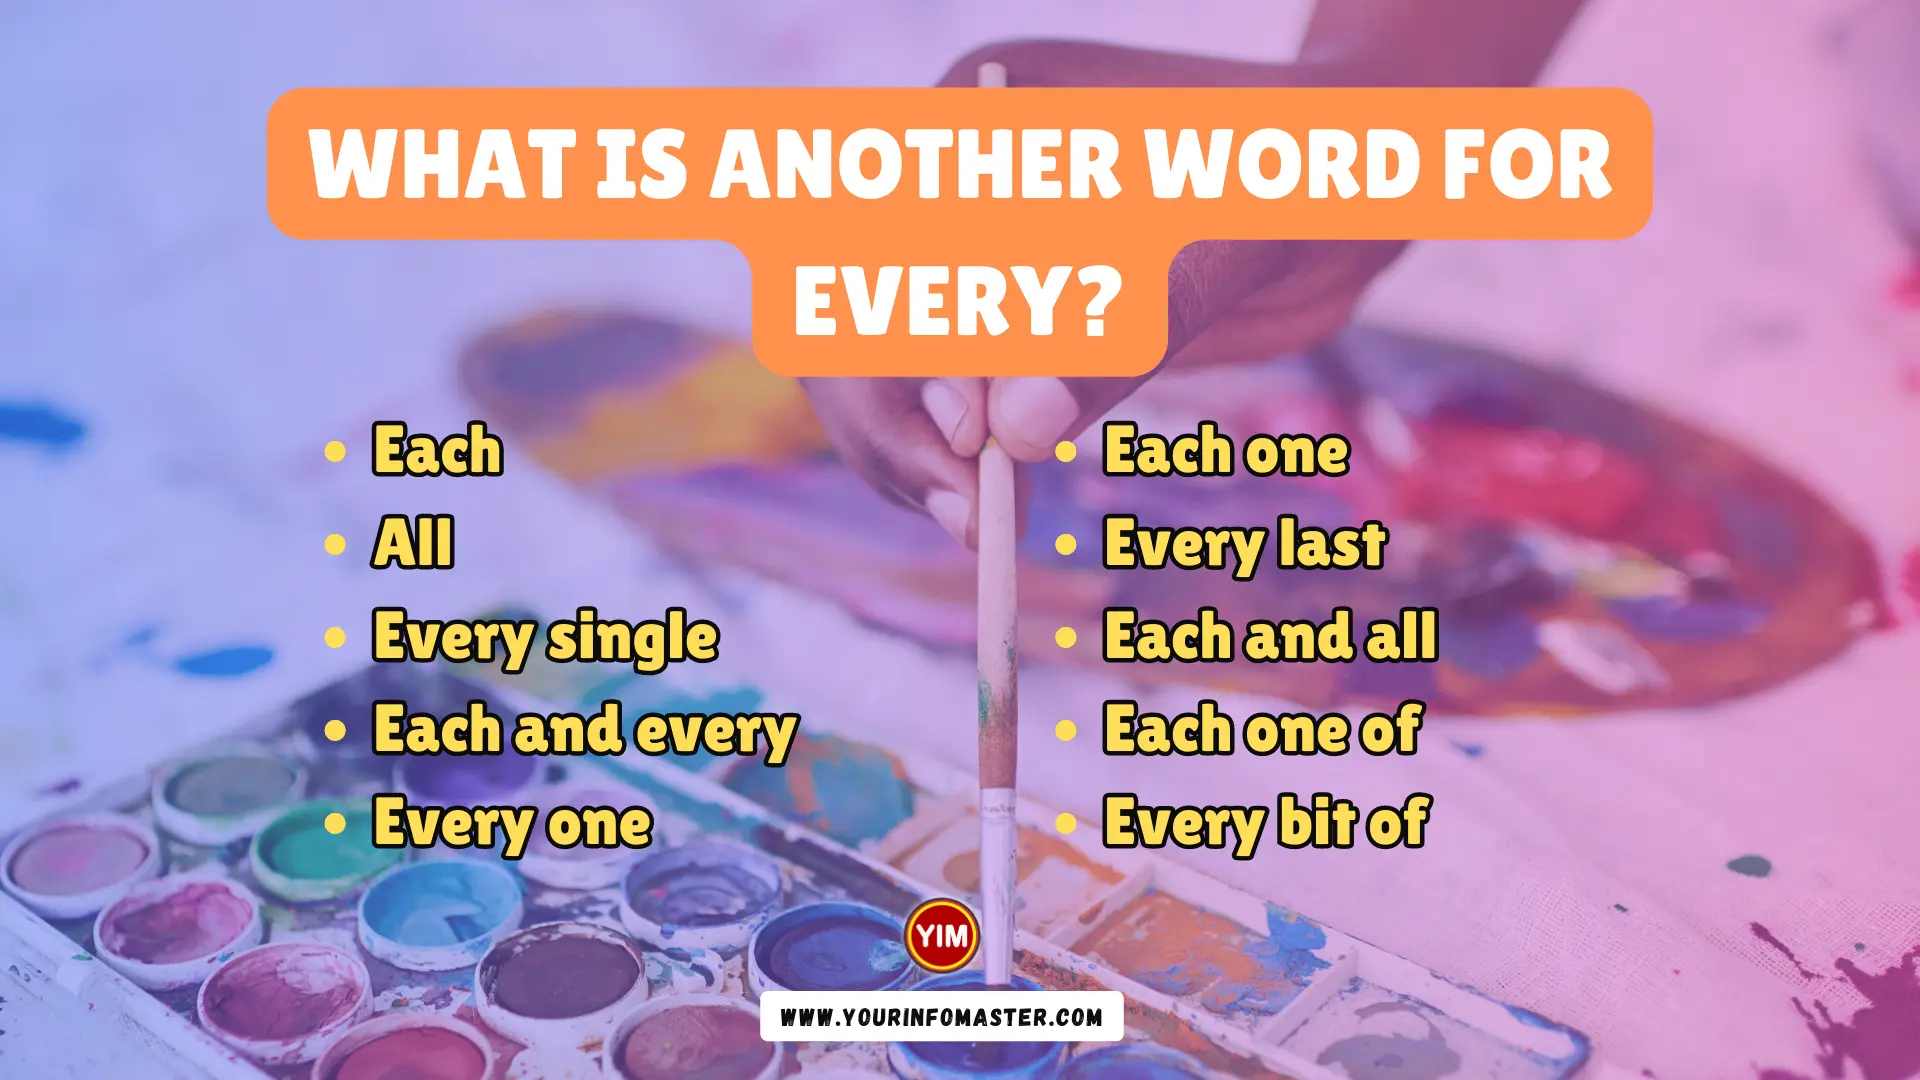 What is another word for Every